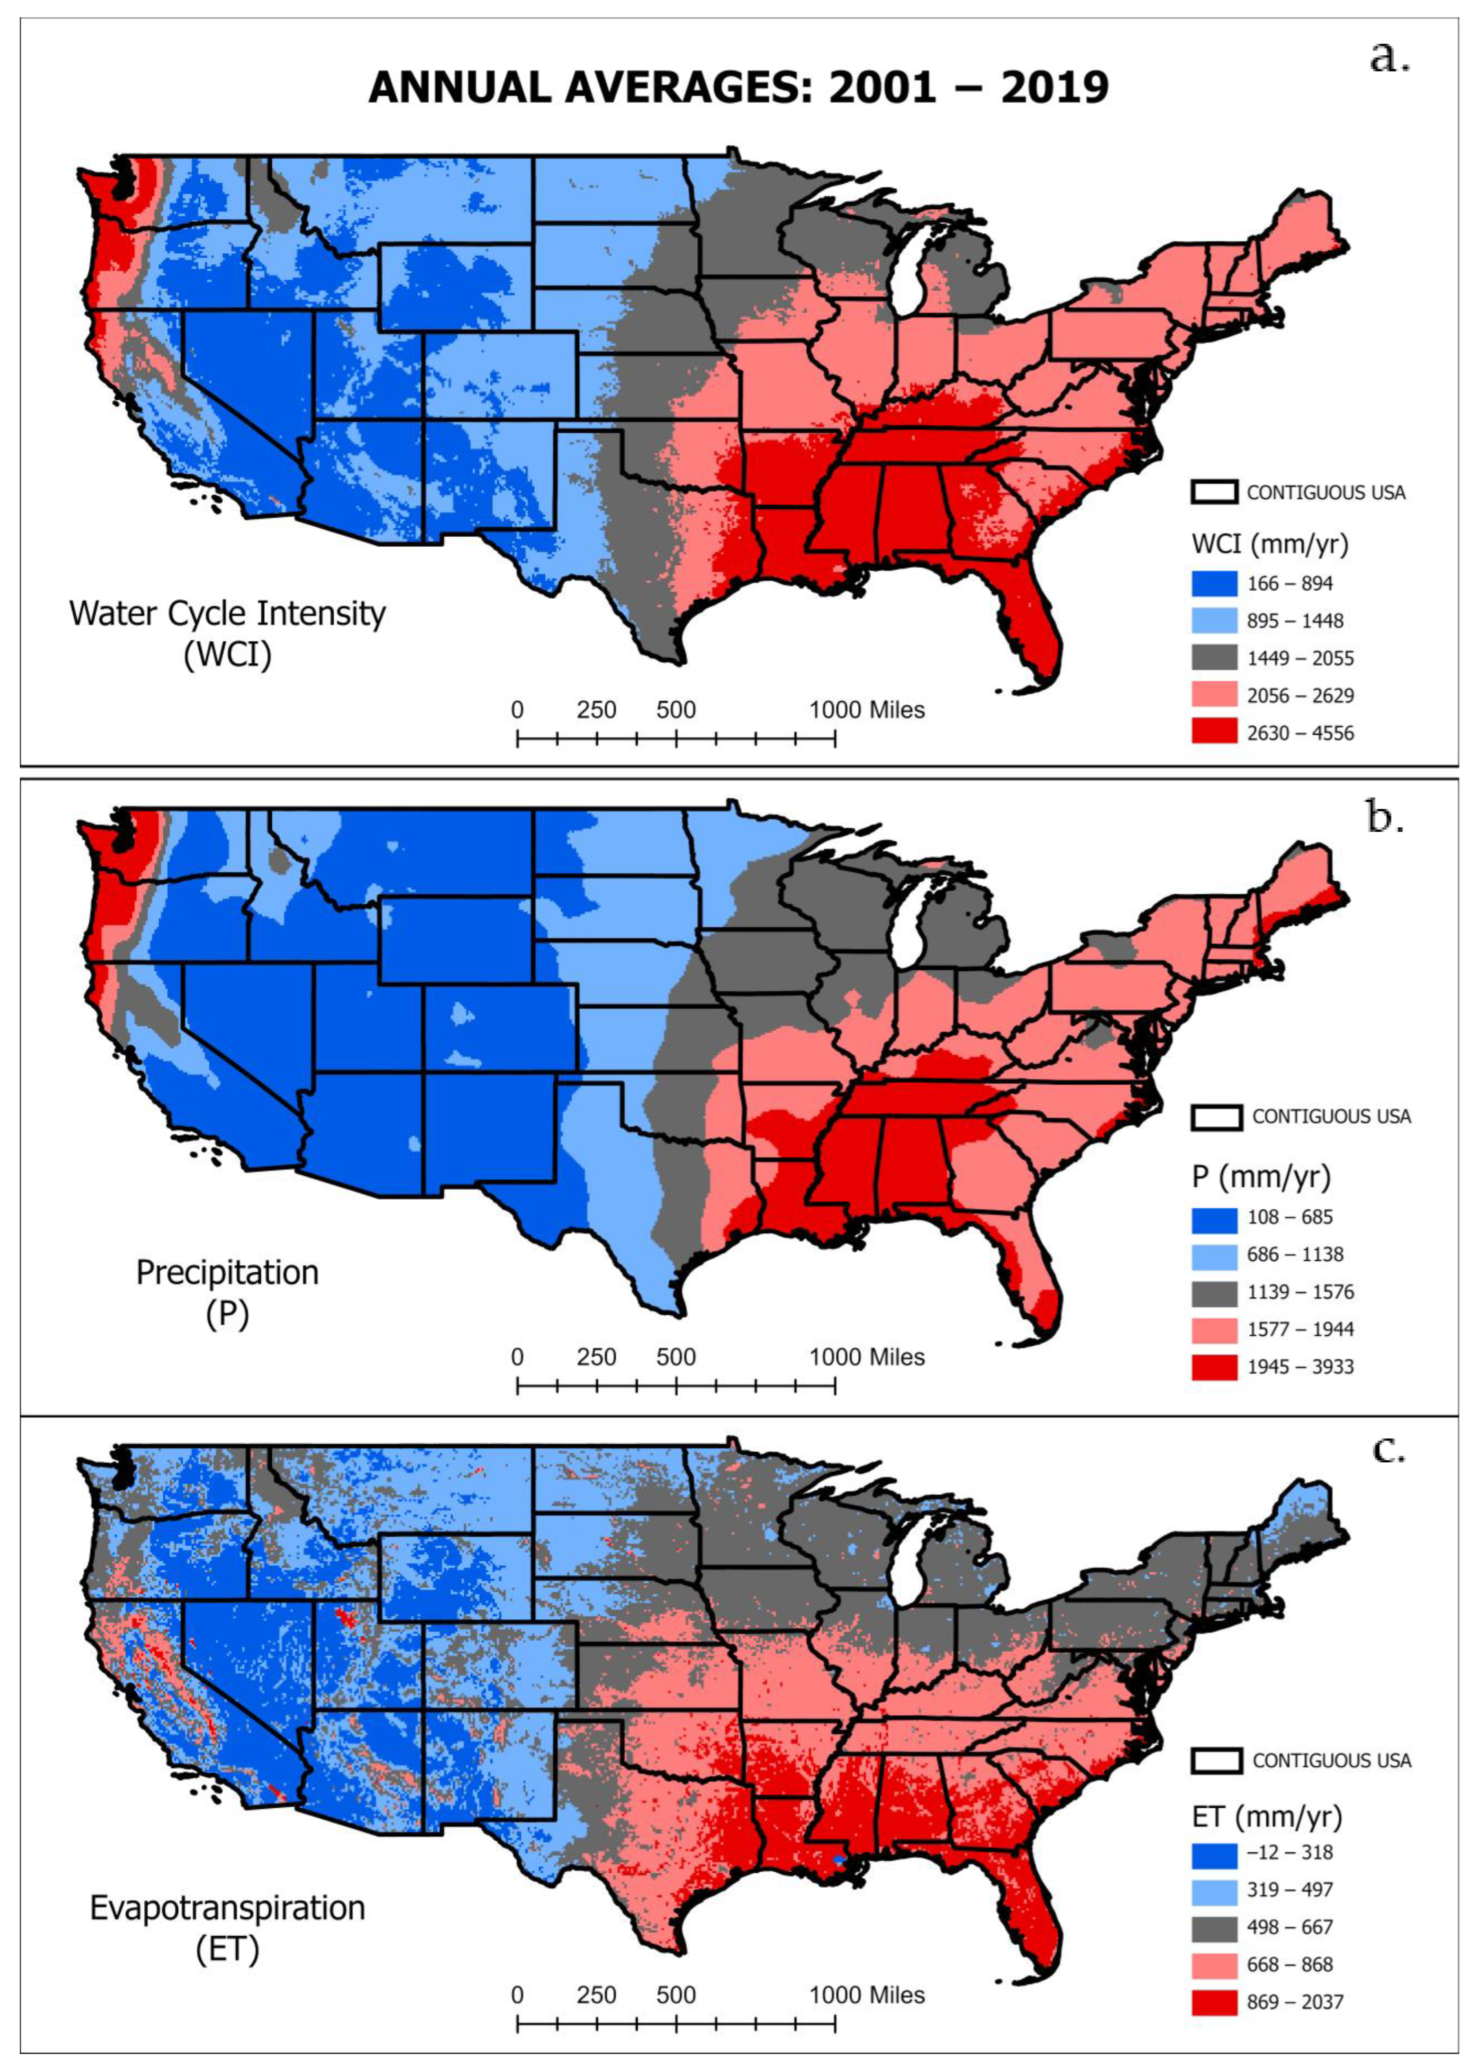 Average annual (a) water cycle intensity, (b) precipitation, and (c) evapotranspiration from 2001 to 2019